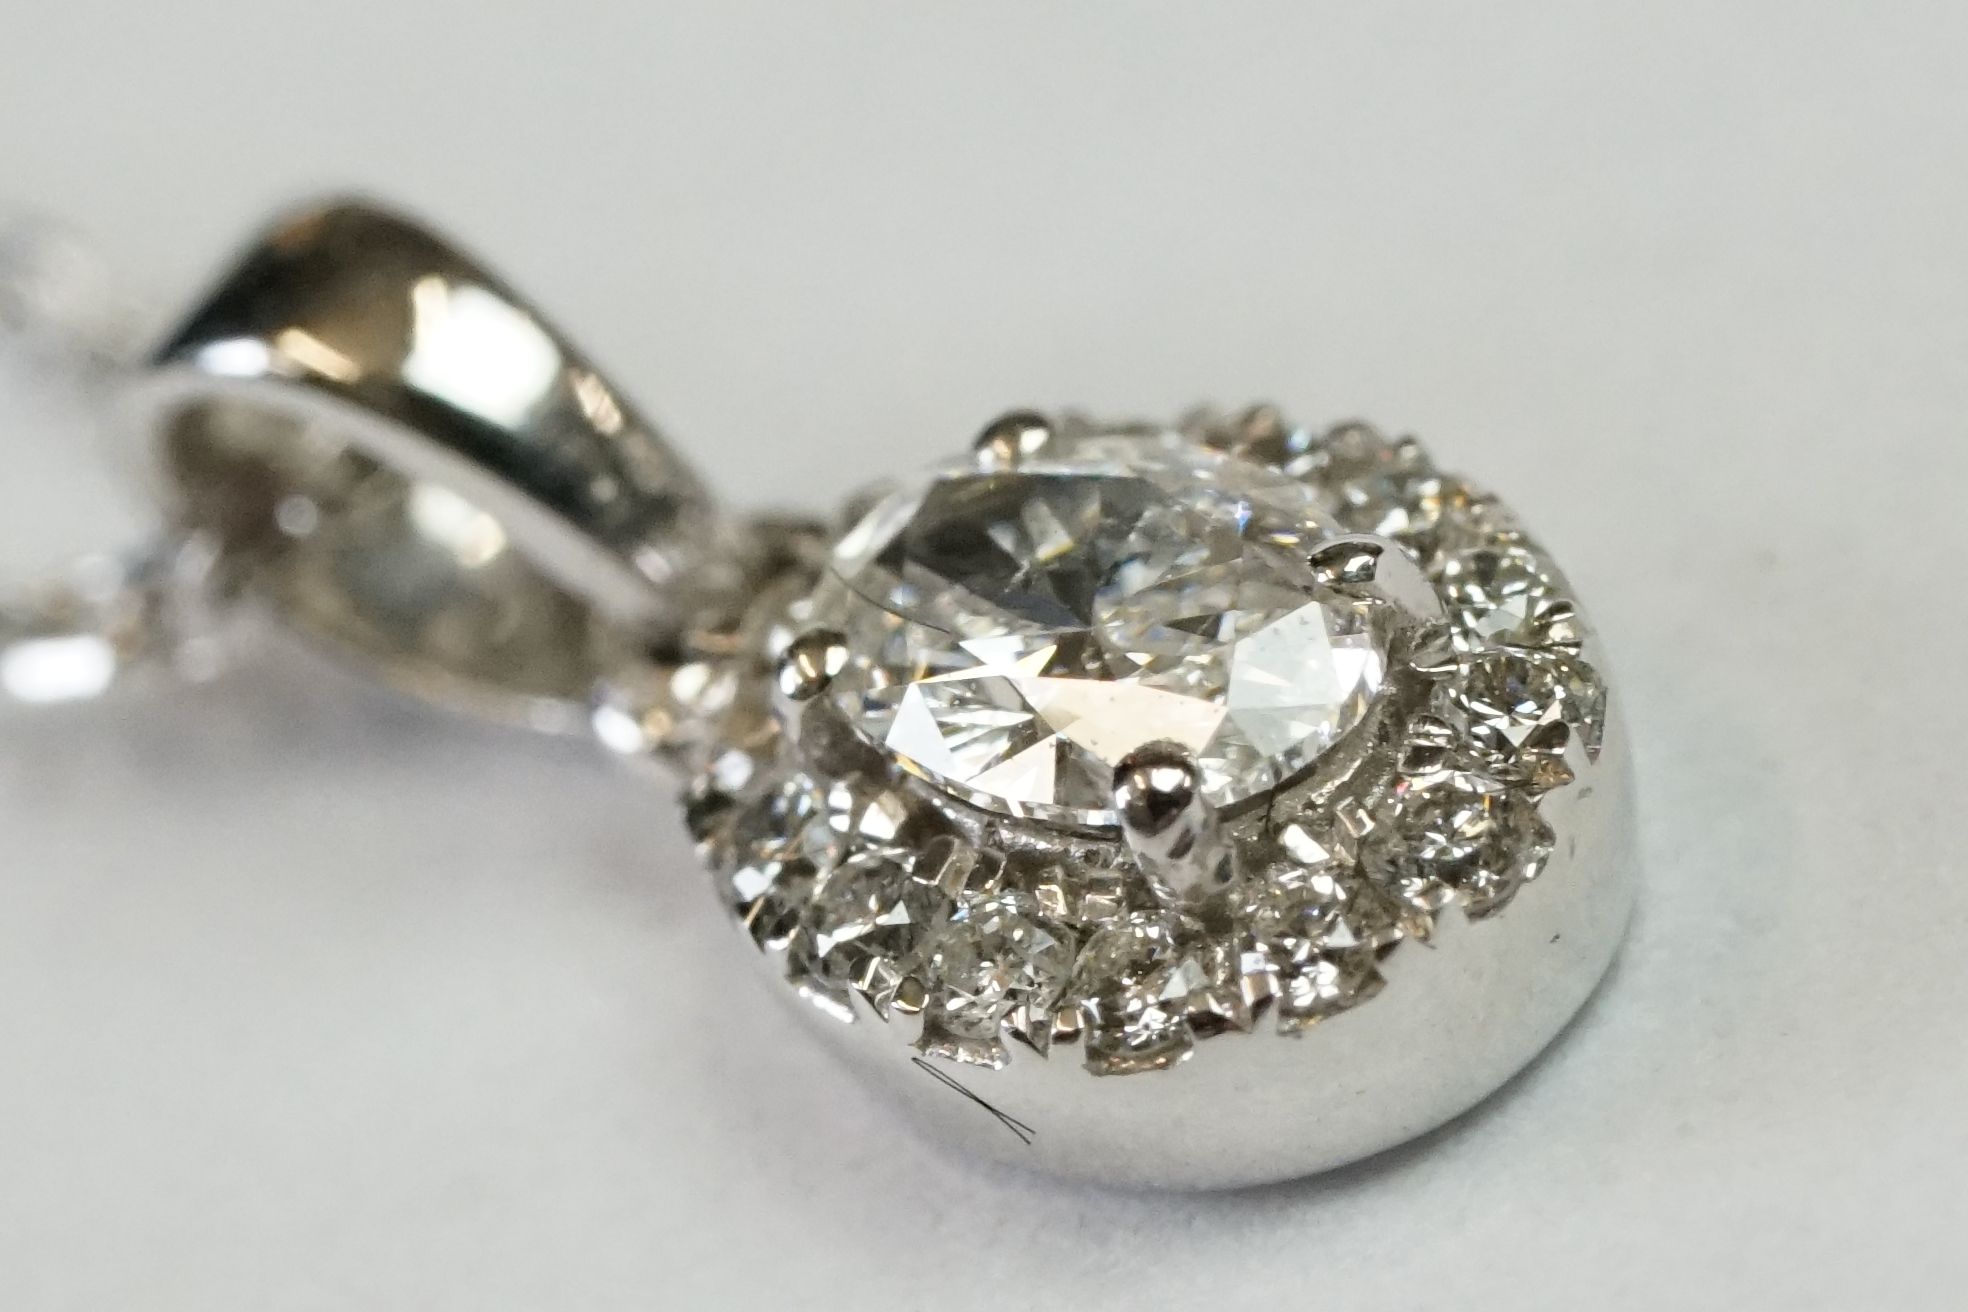 18ct White Gold Diamond Pendant of 25 points approx. total on gold chain - Image 3 of 11